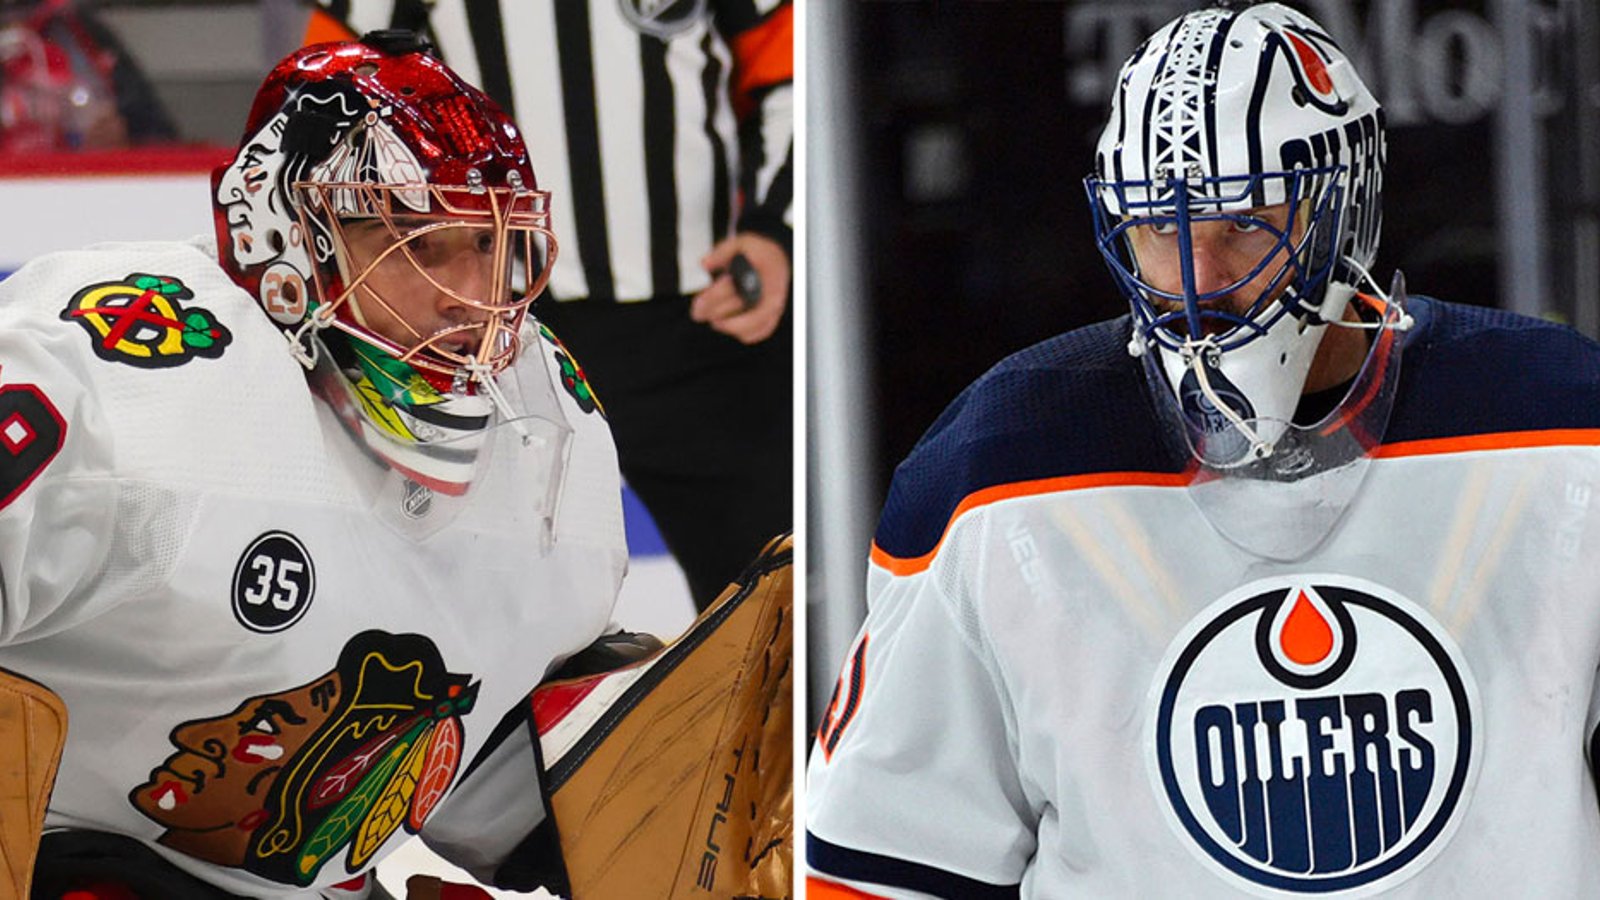 Report: Smith out long term, Oilers linked to Fleury again